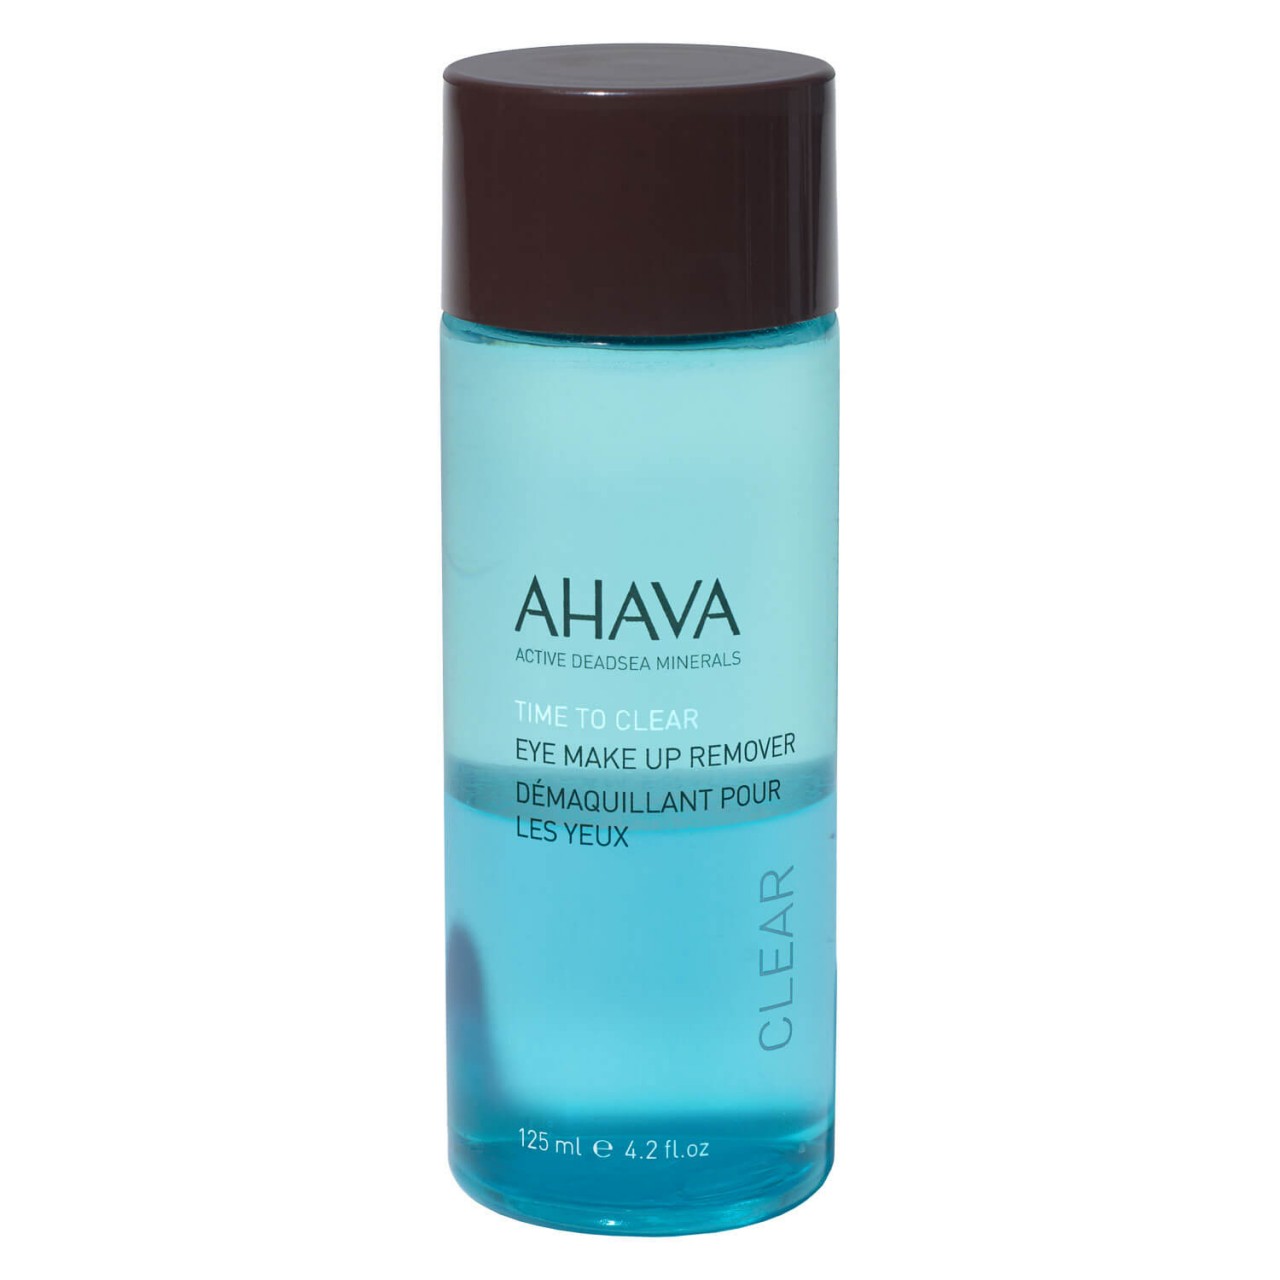 Time To Clear - Eye Make up Remover von Ahava